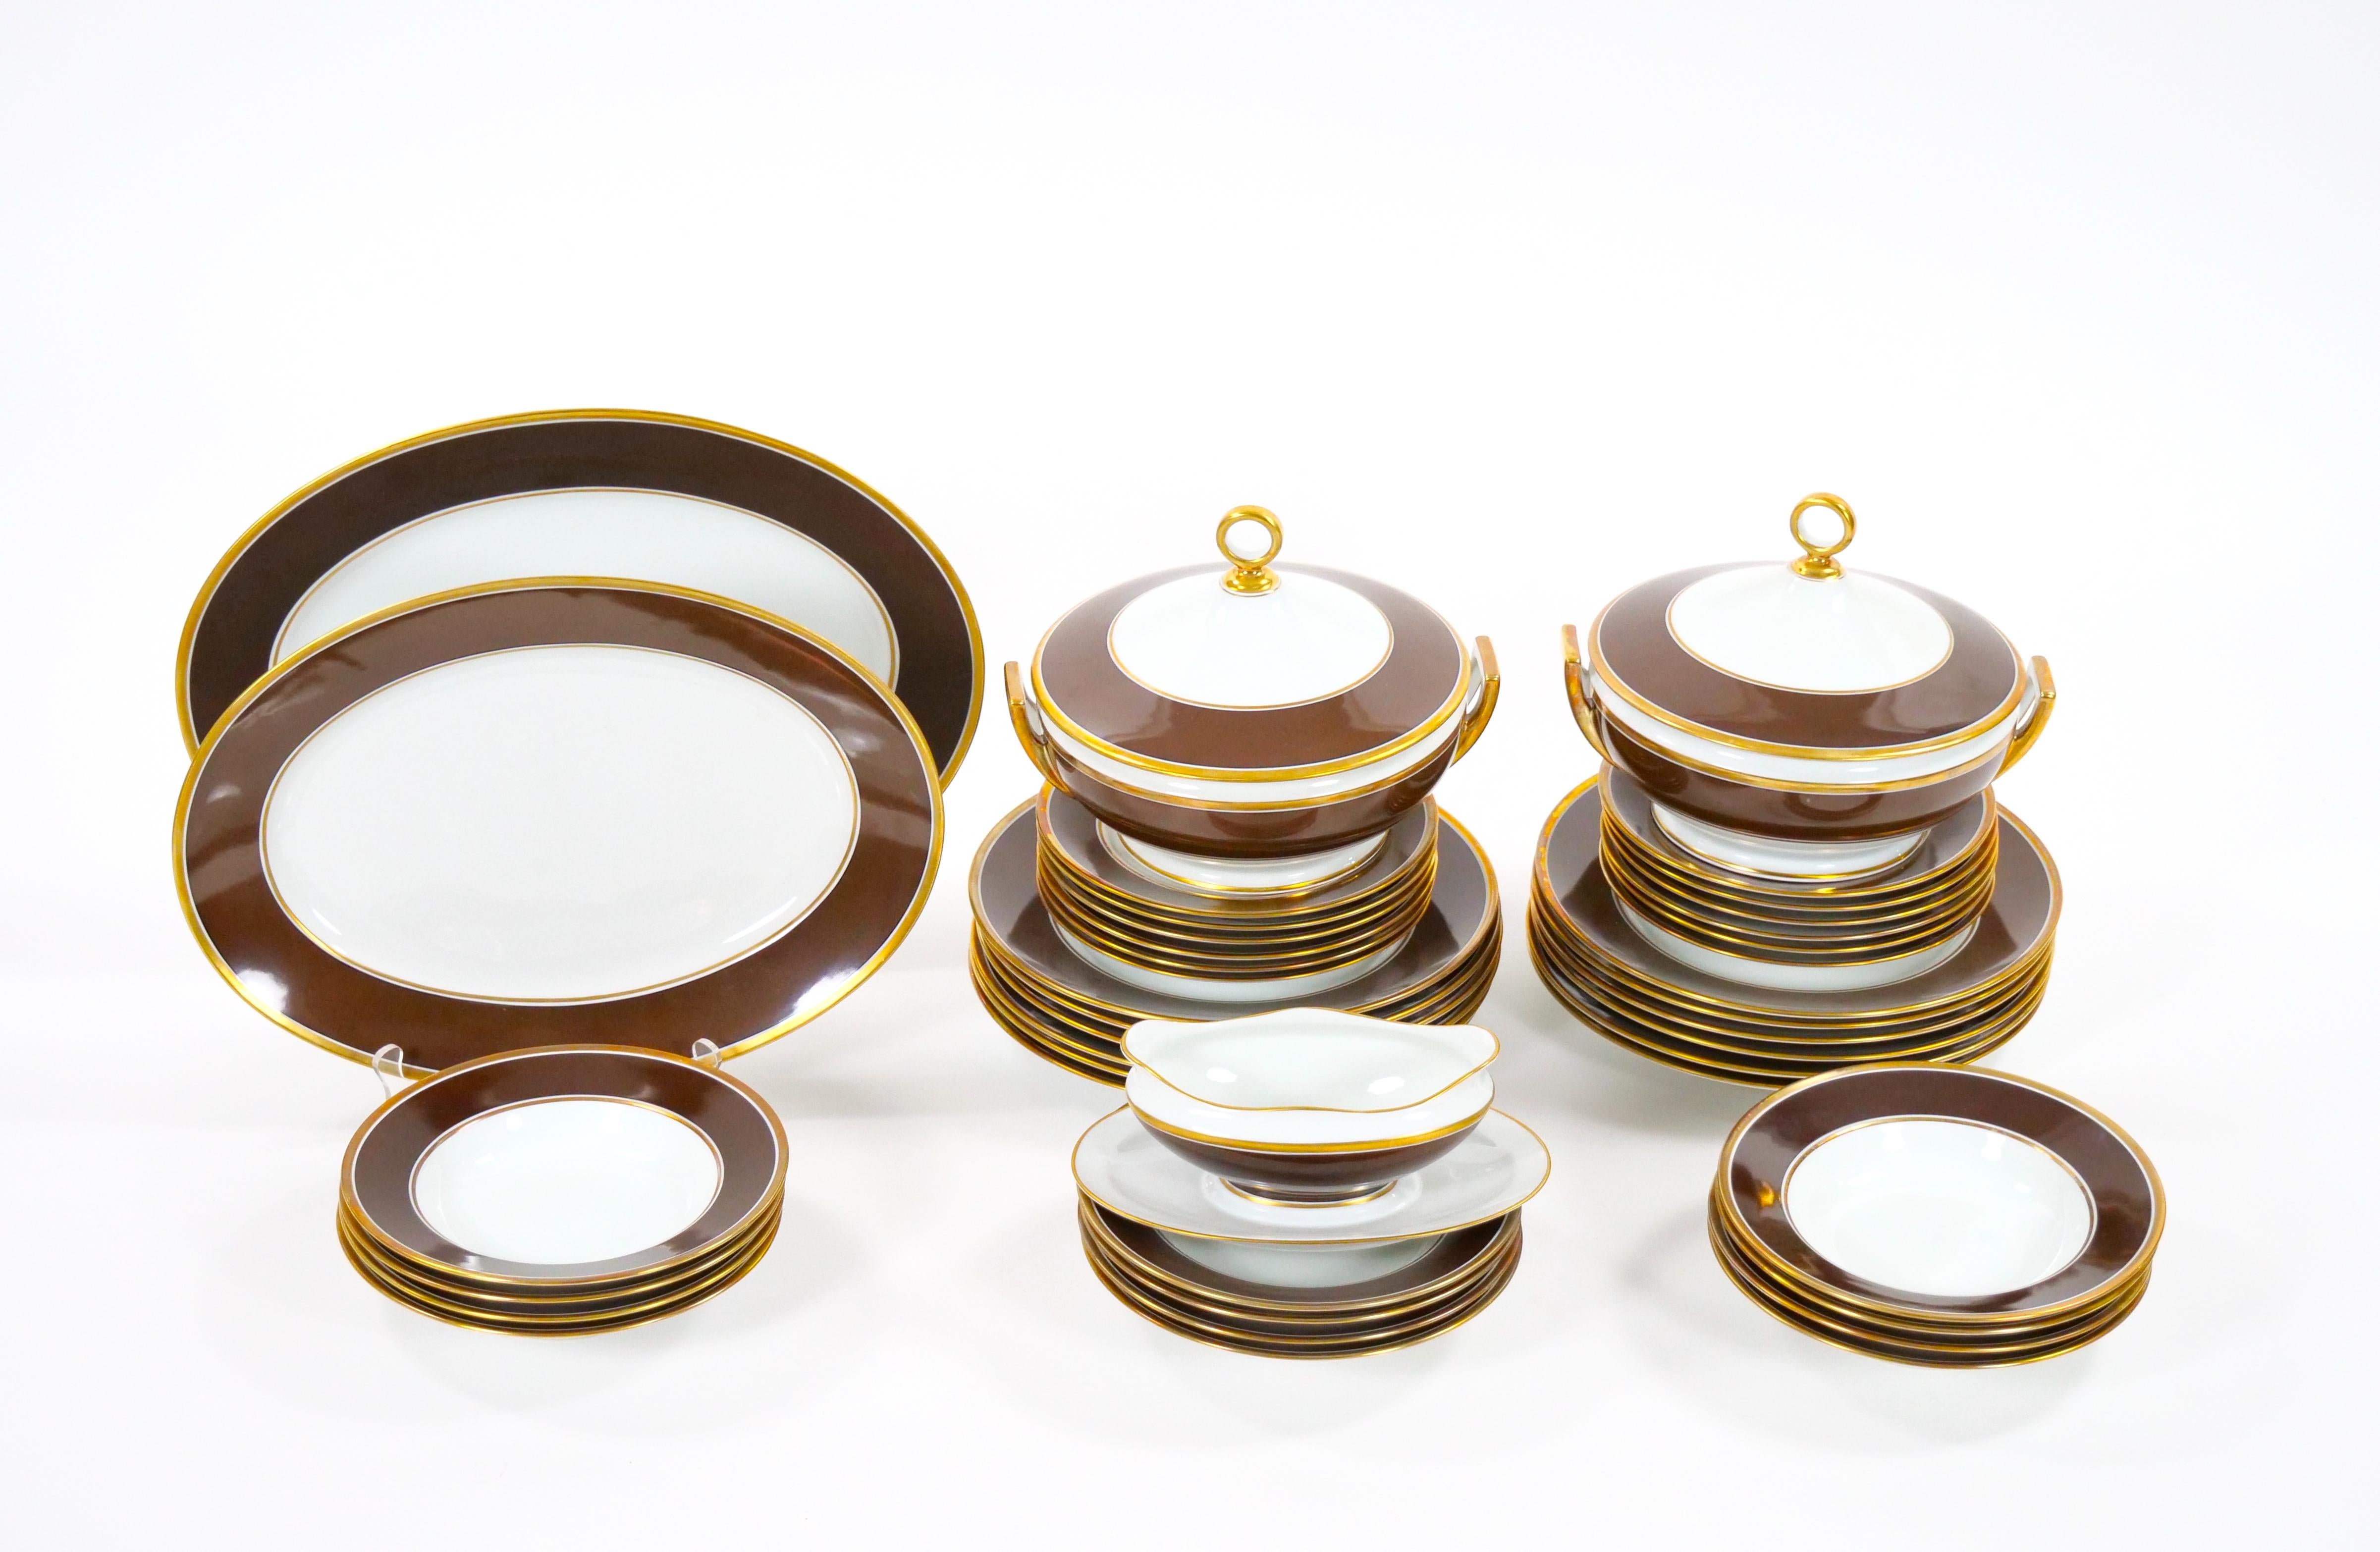 Italian Richard Ginori Brown & Gold Trimmed Extensive Dinnerware Service Of 99 Pieces For Sale